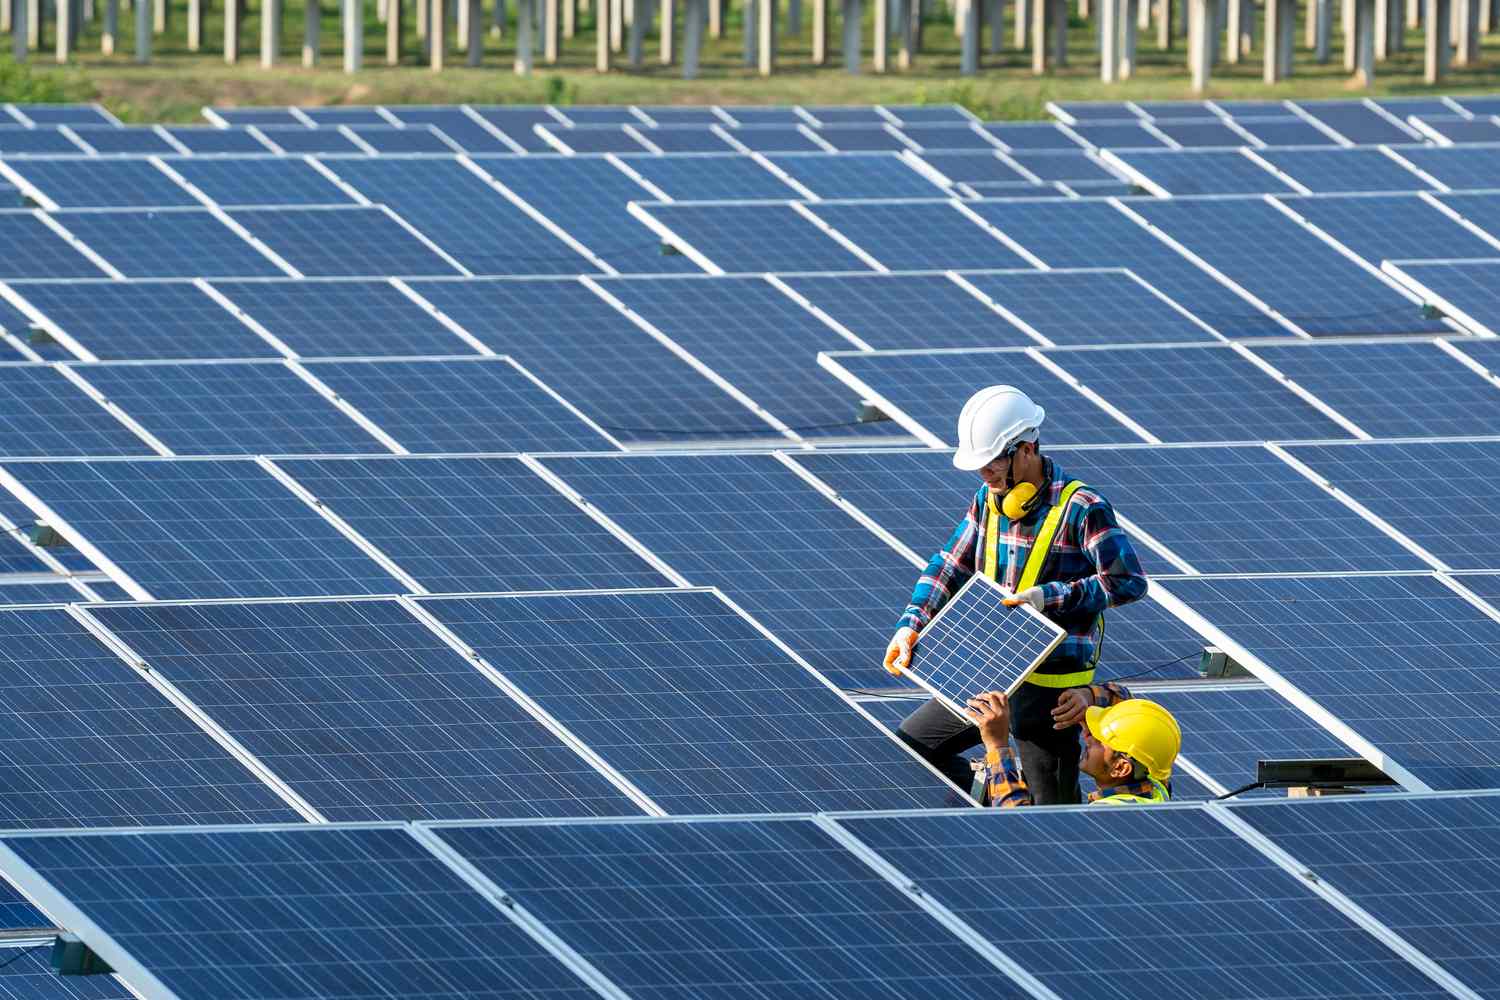 What to Look For in a Solar Panel Company​